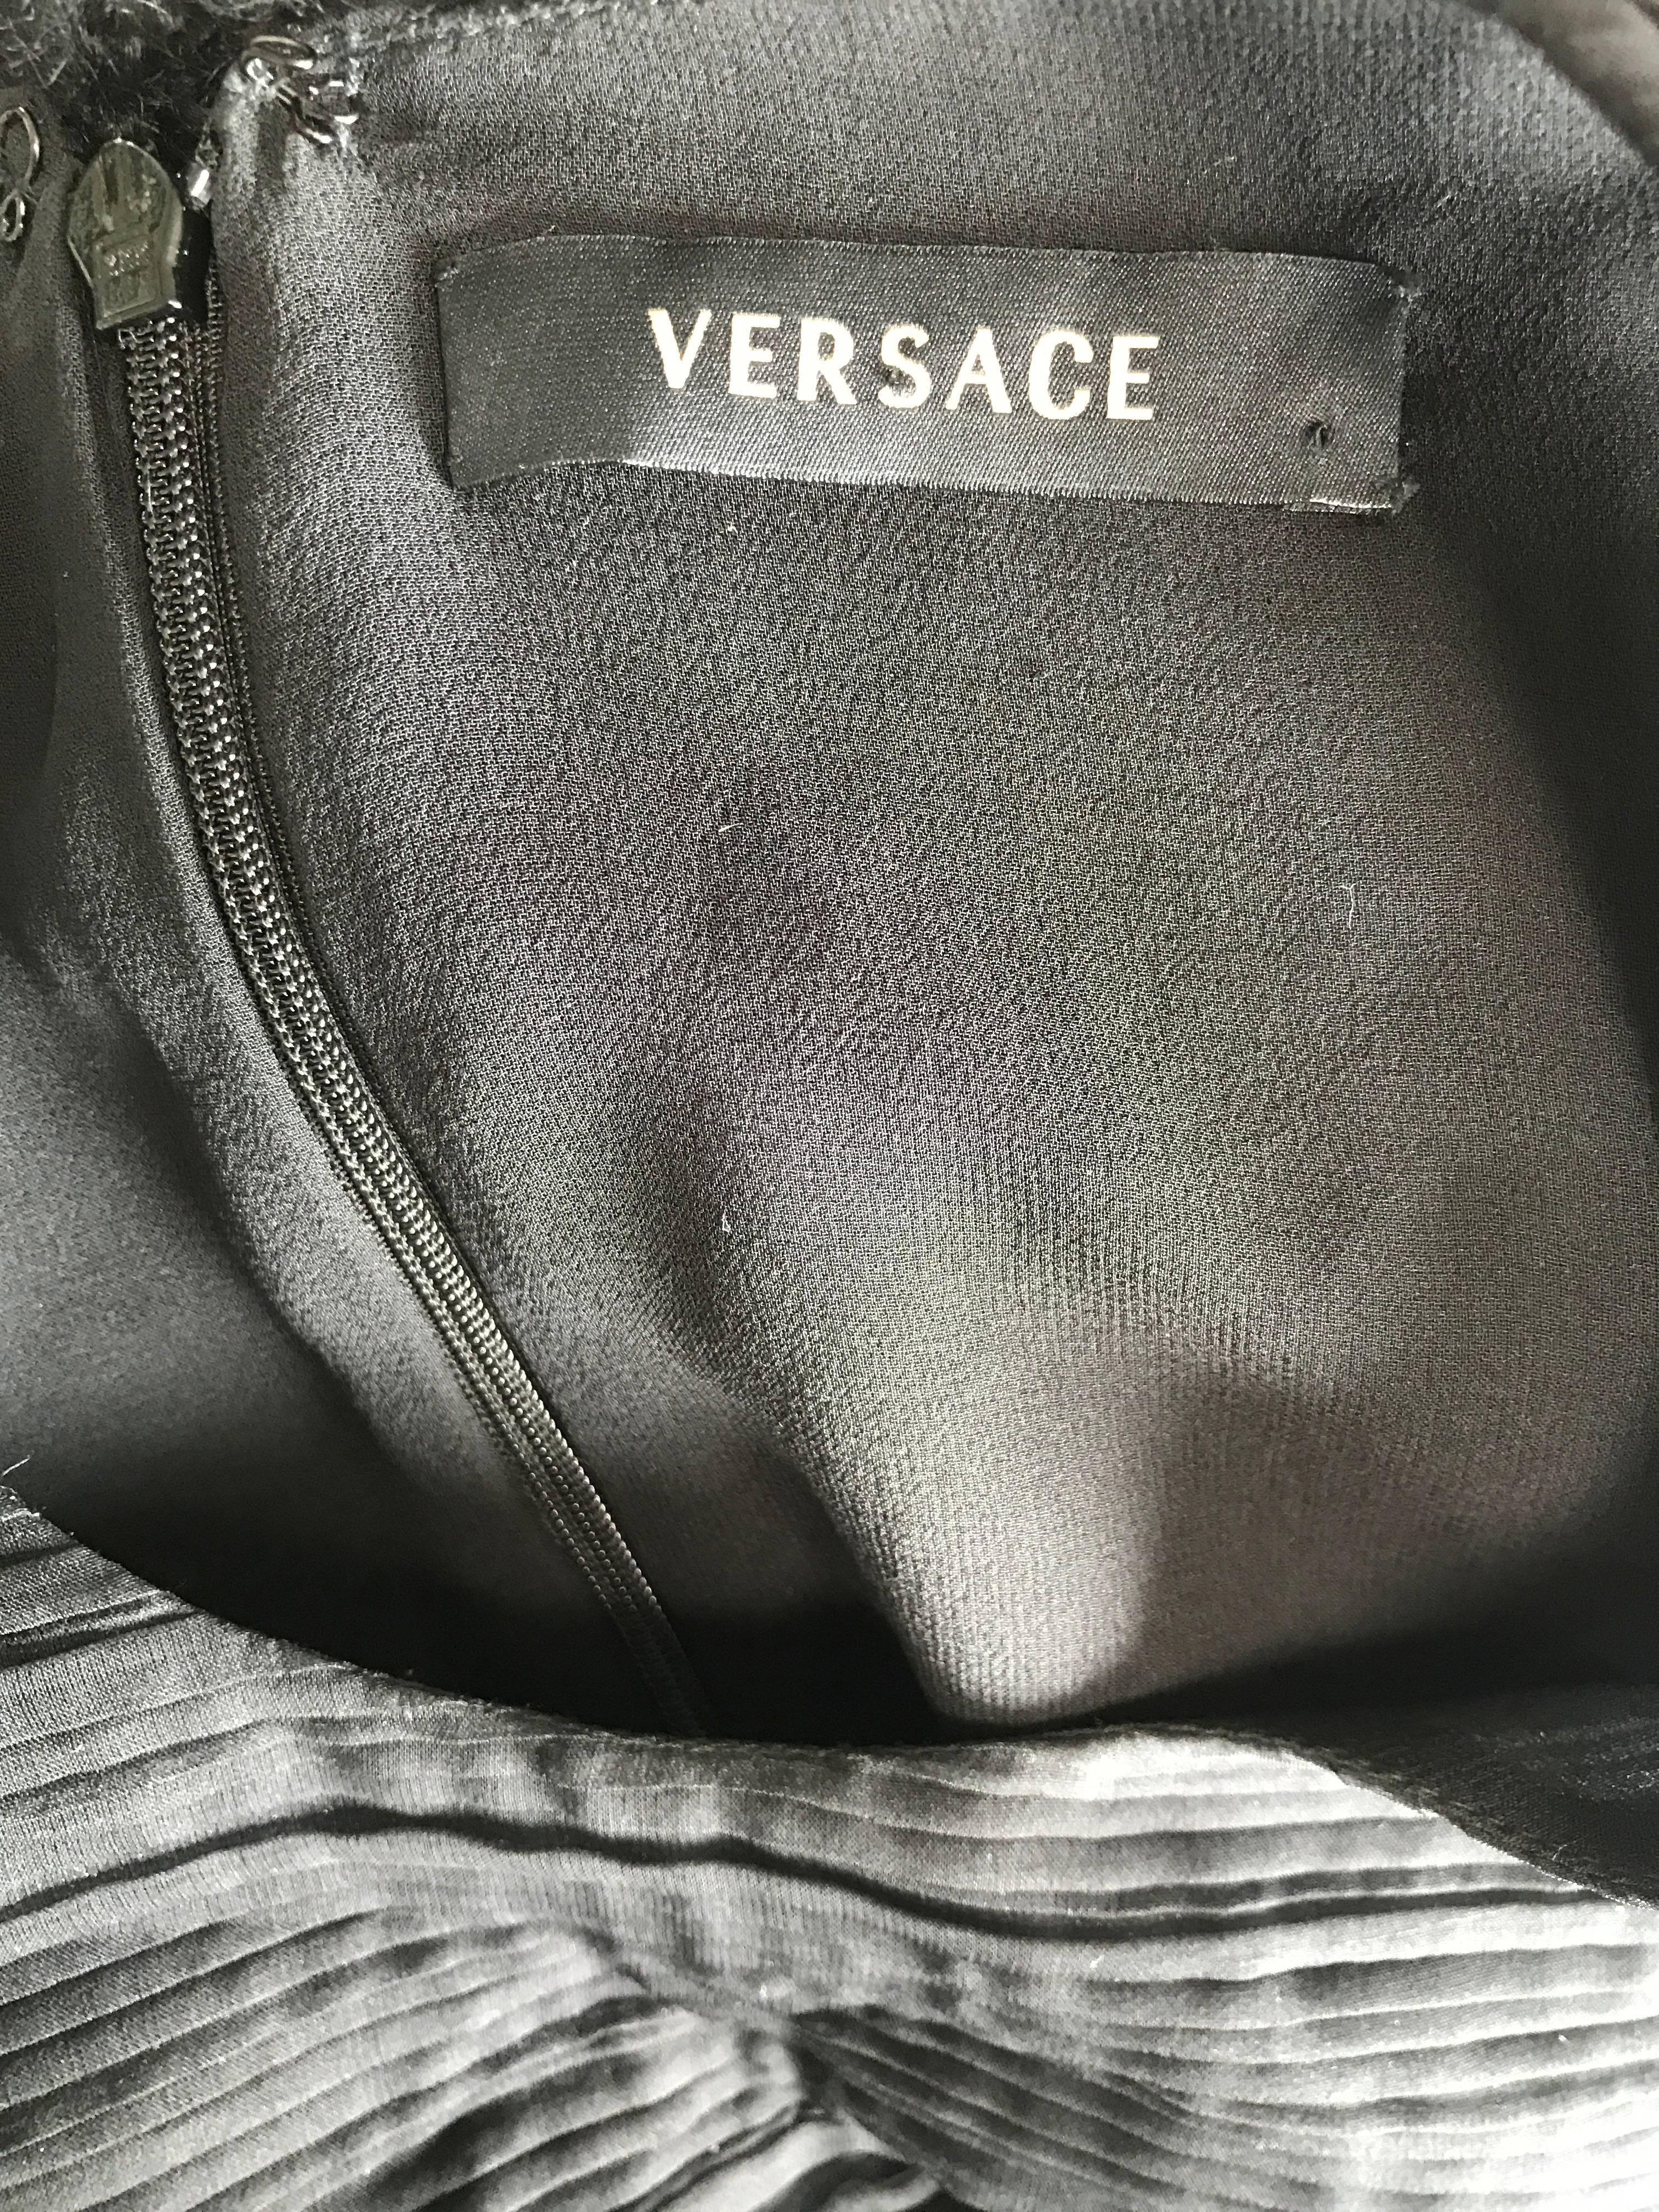 2000s Gianni Versace Black Silk Side Cut Out Rhinestone Bodycon Vintage Dress  For Sale 3